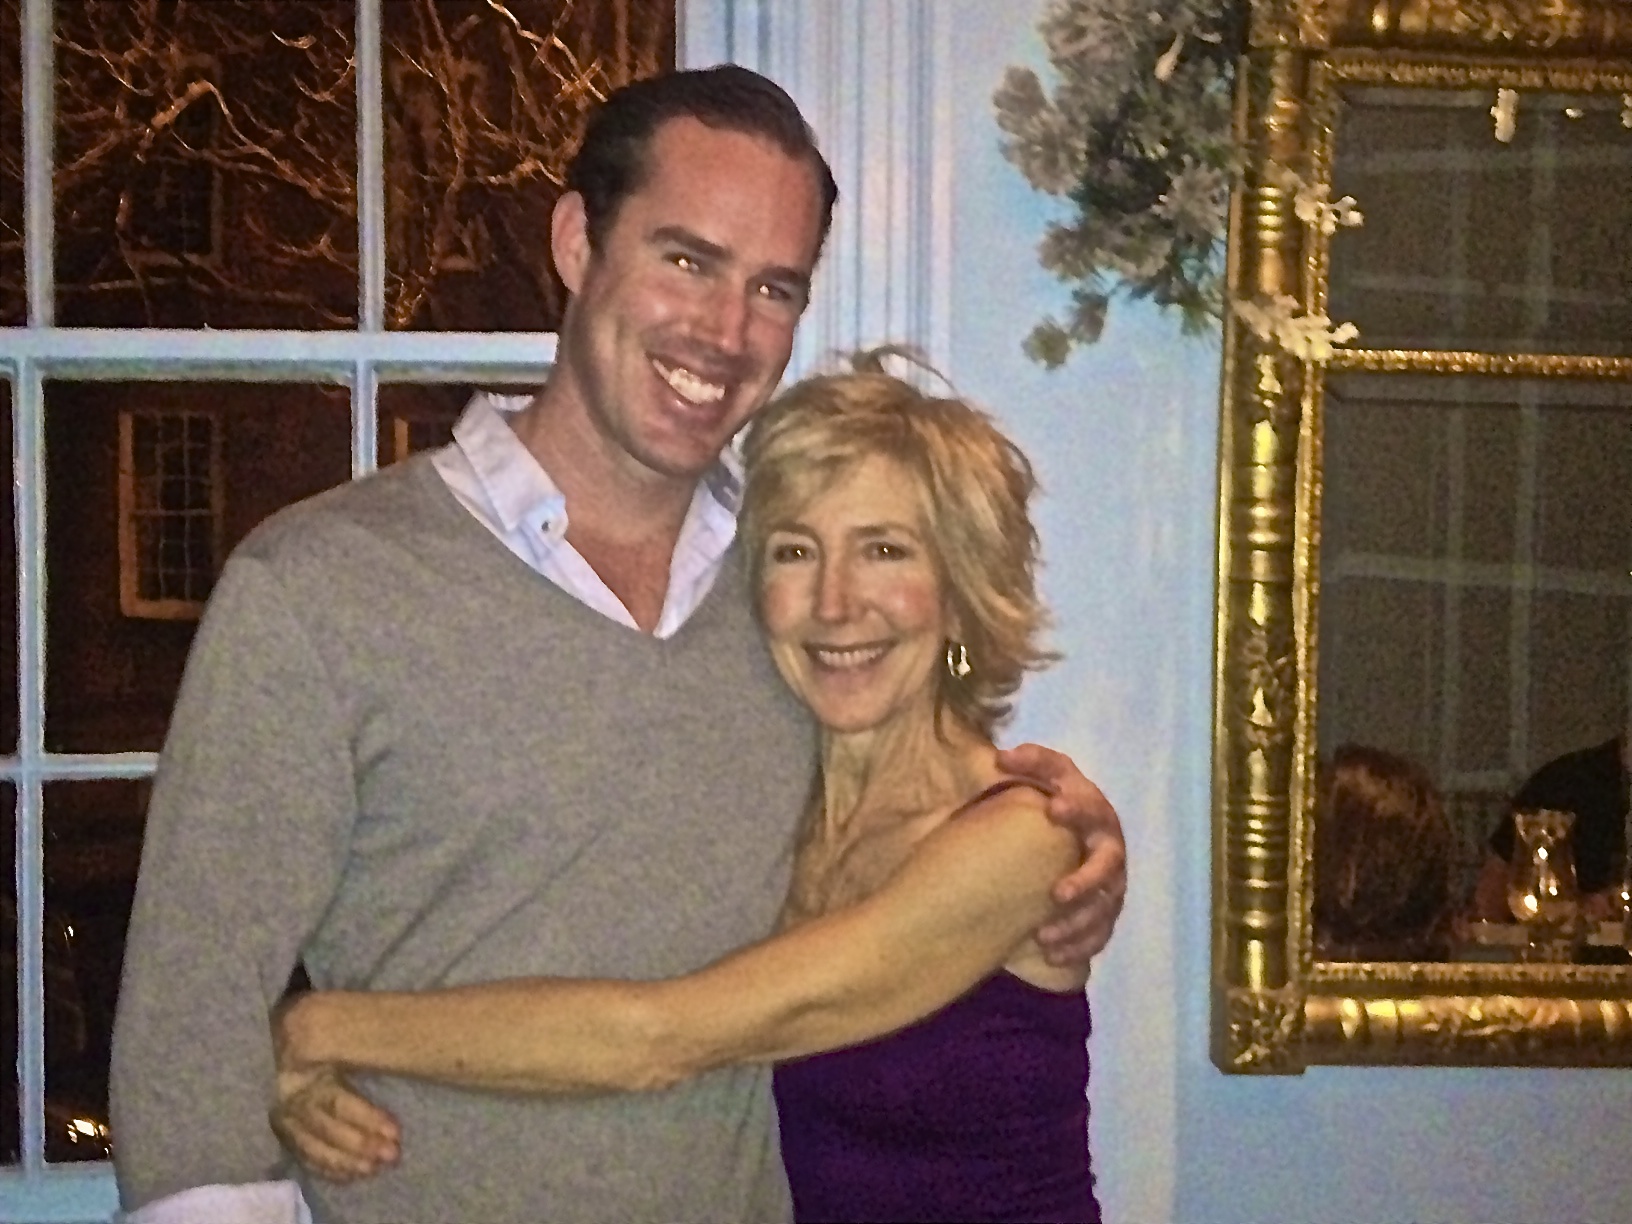 Justin Trevor Winters and Lin Shaye